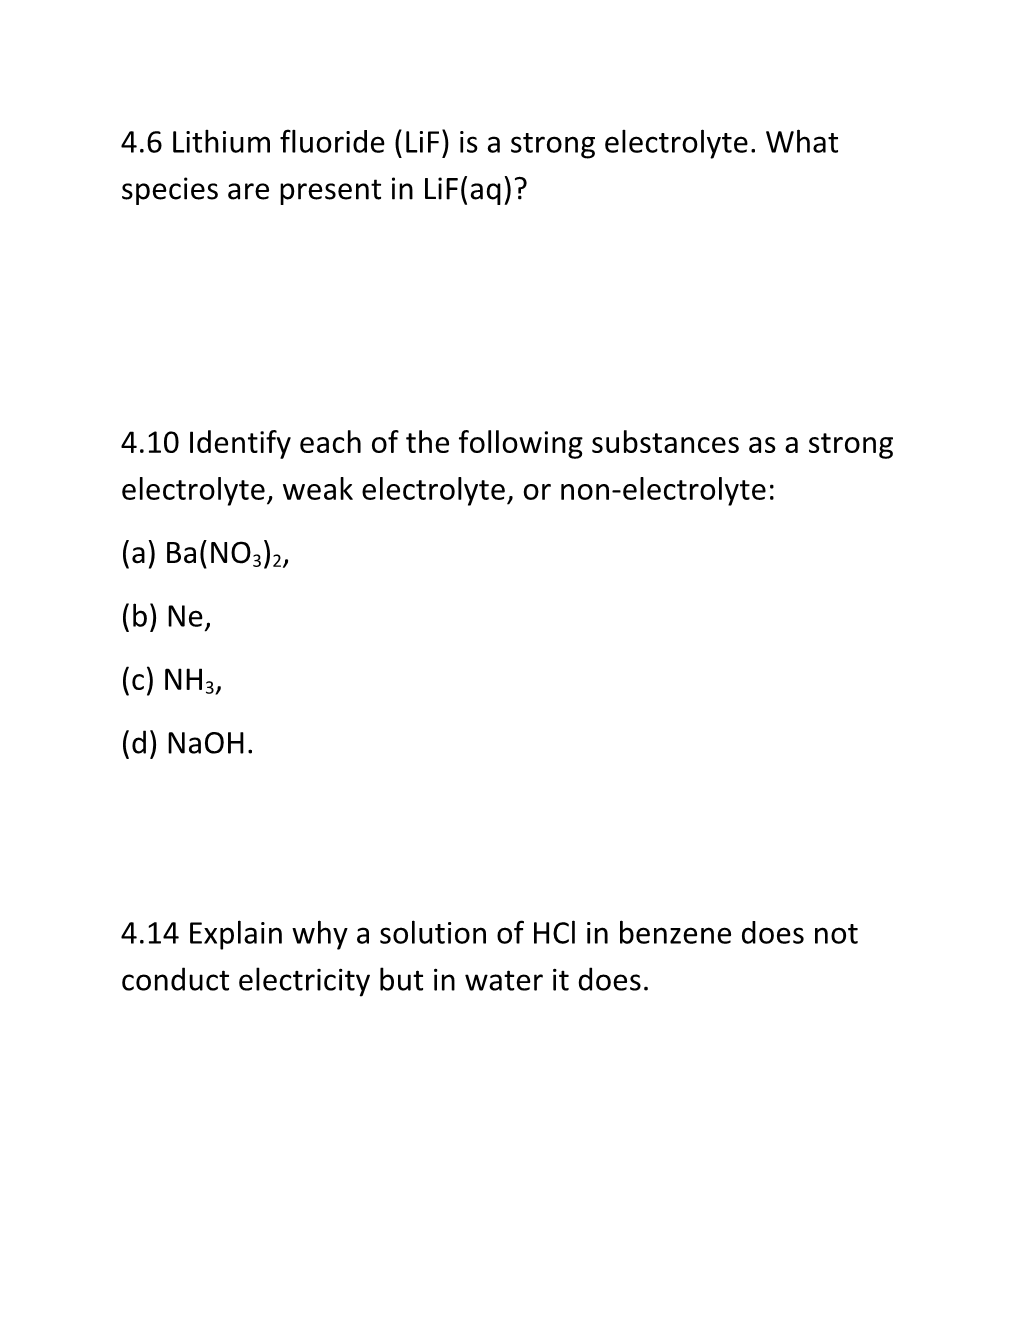 4.6 Lithium Fluoride (Lif) Is a Strong Electrolyte. What Species Are Present in Lif(Aq)?